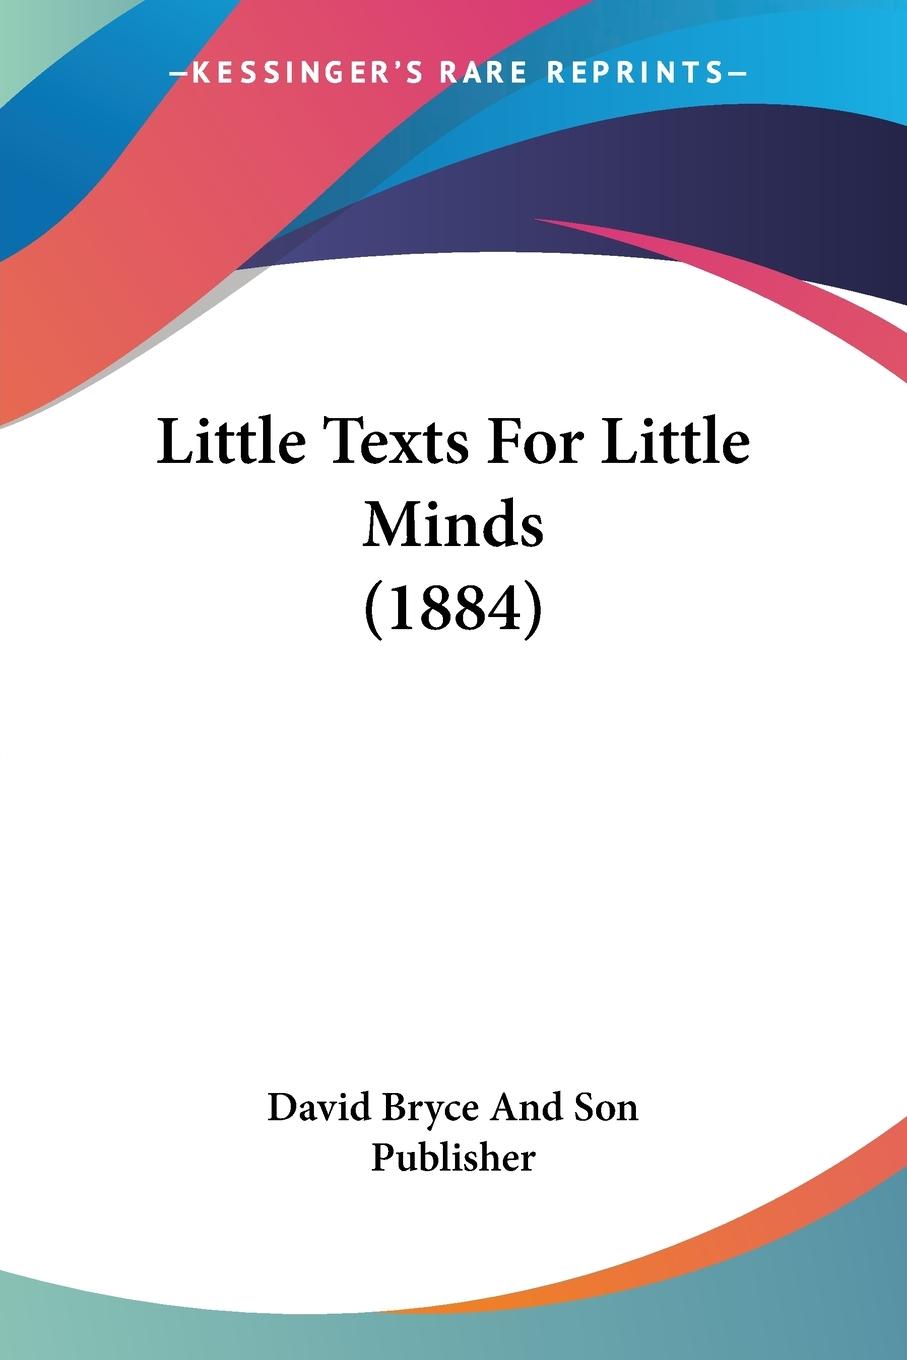 Little Texts For Little Minds (1884) - David Bryce And Son Publisher